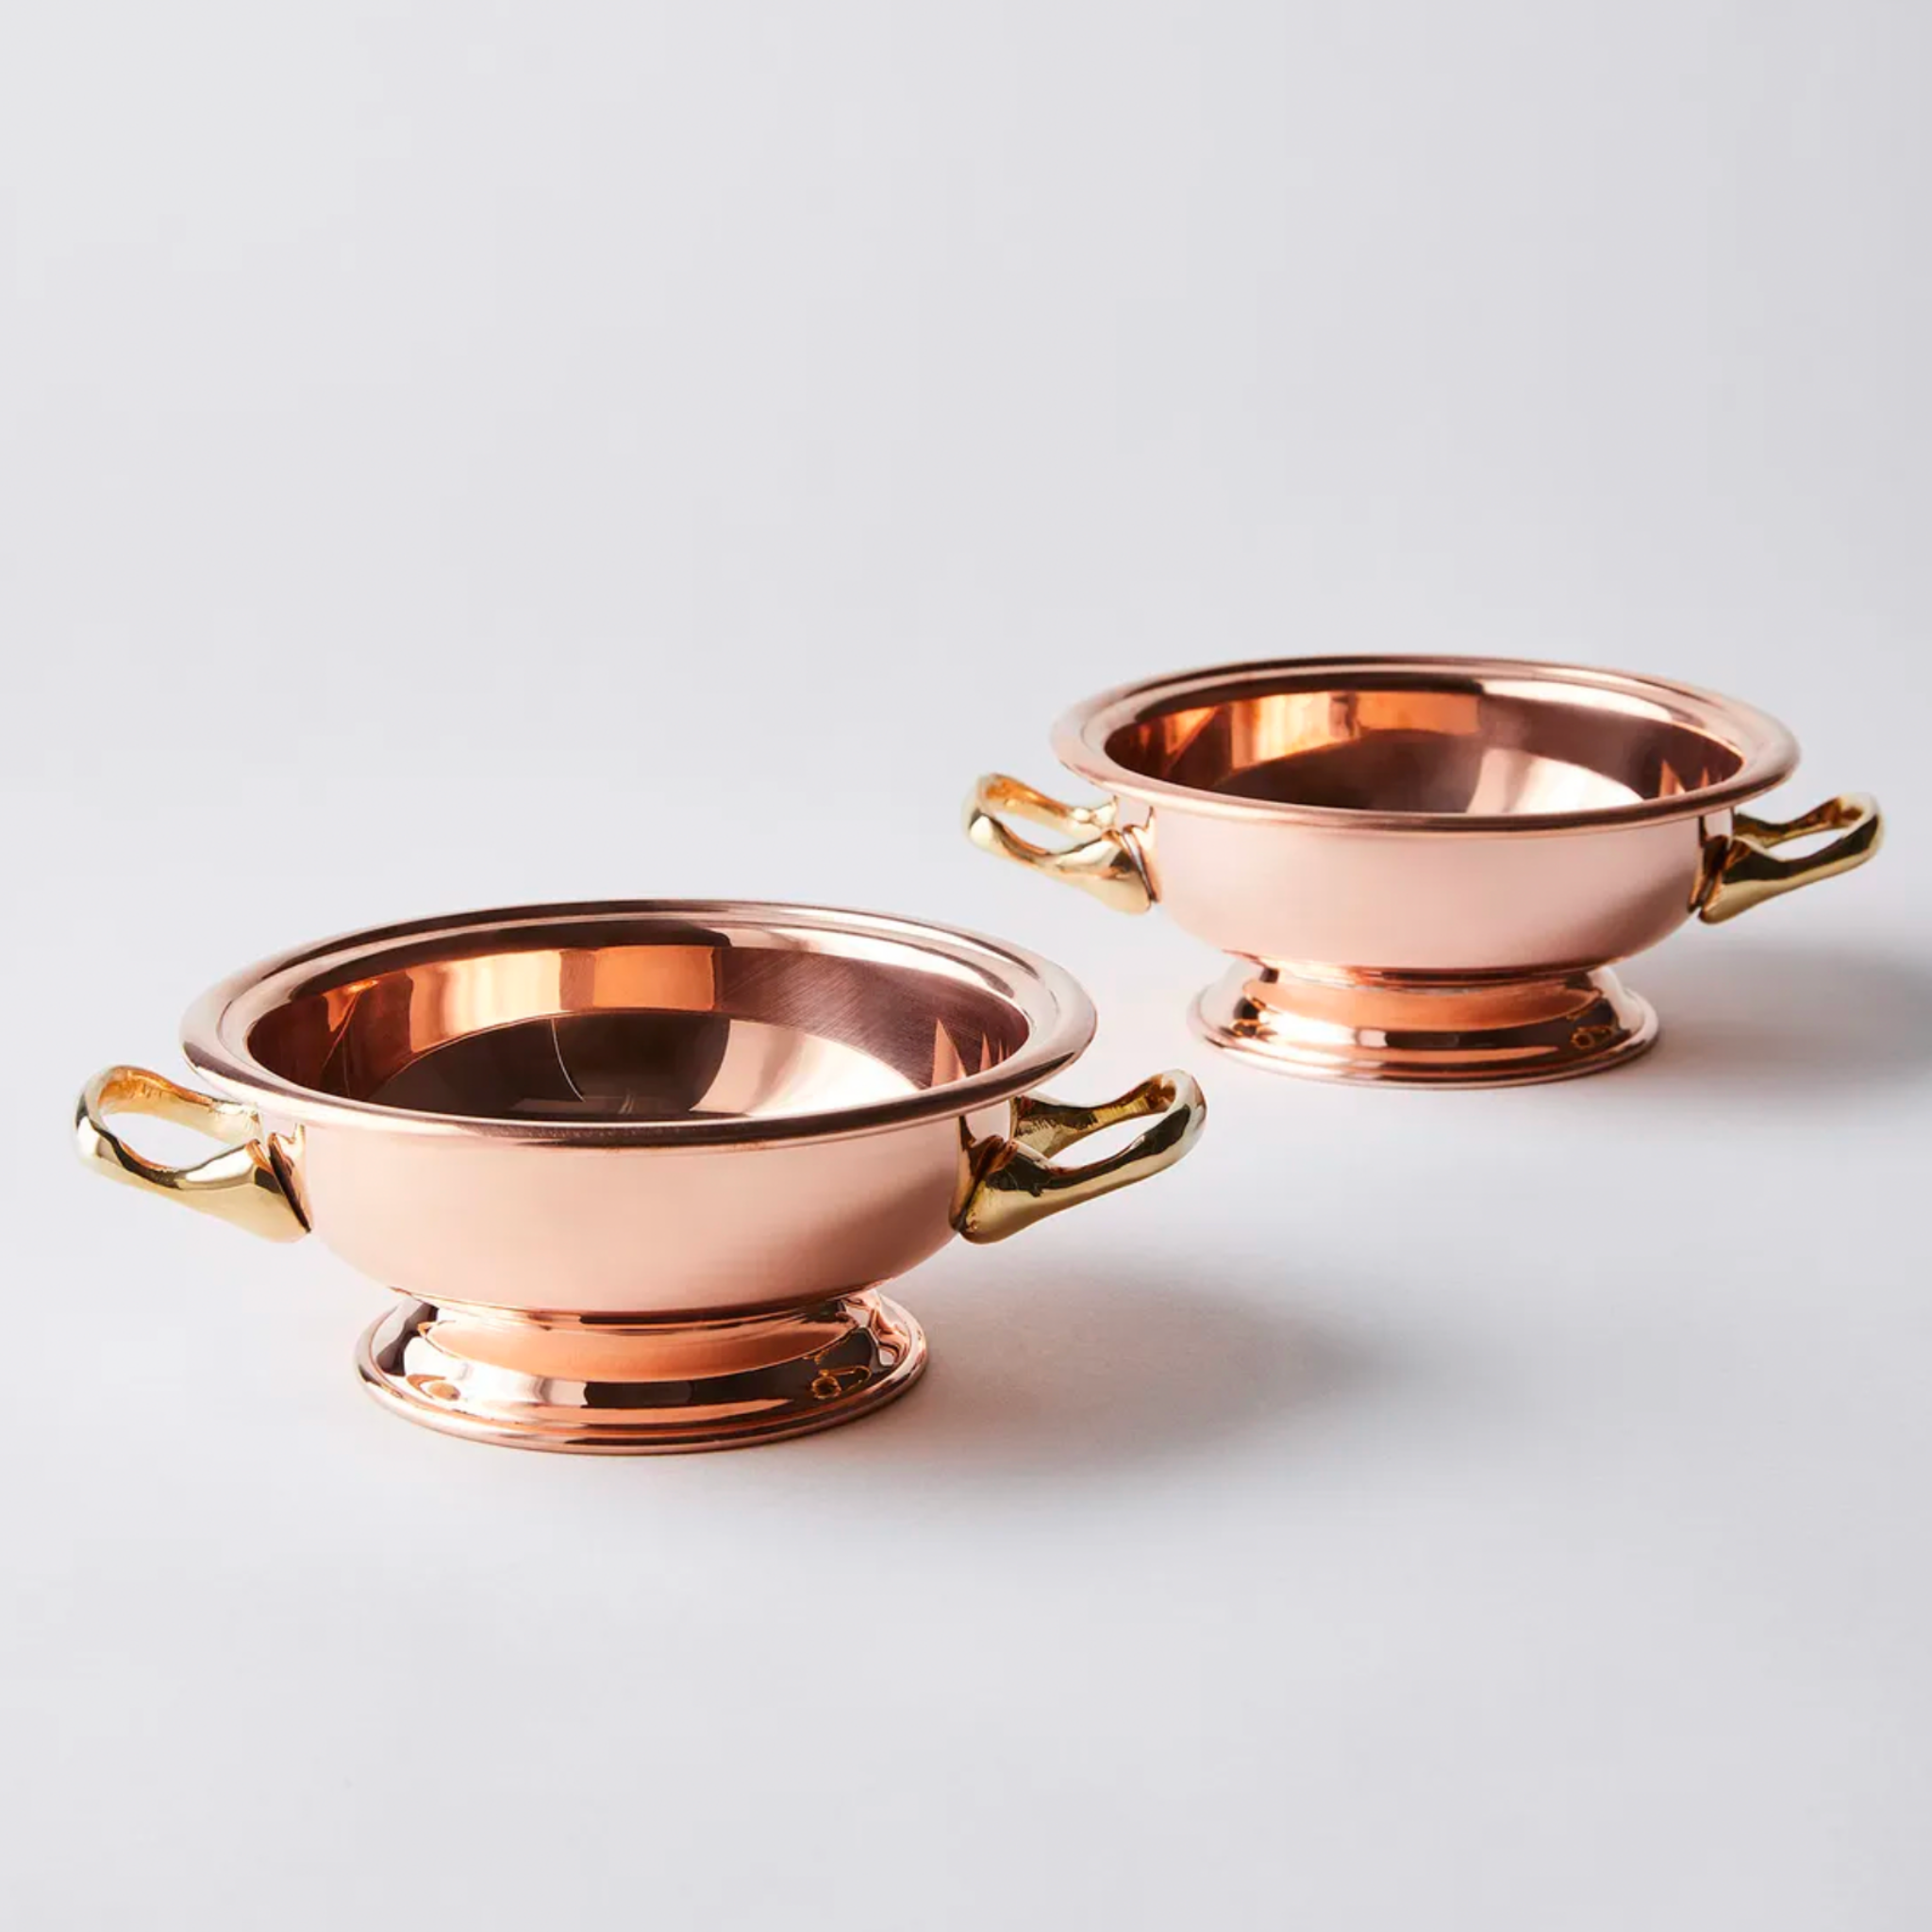 Coppermill Kitchen Vintage Inspired Copper Coupe Glasses - Set of 2